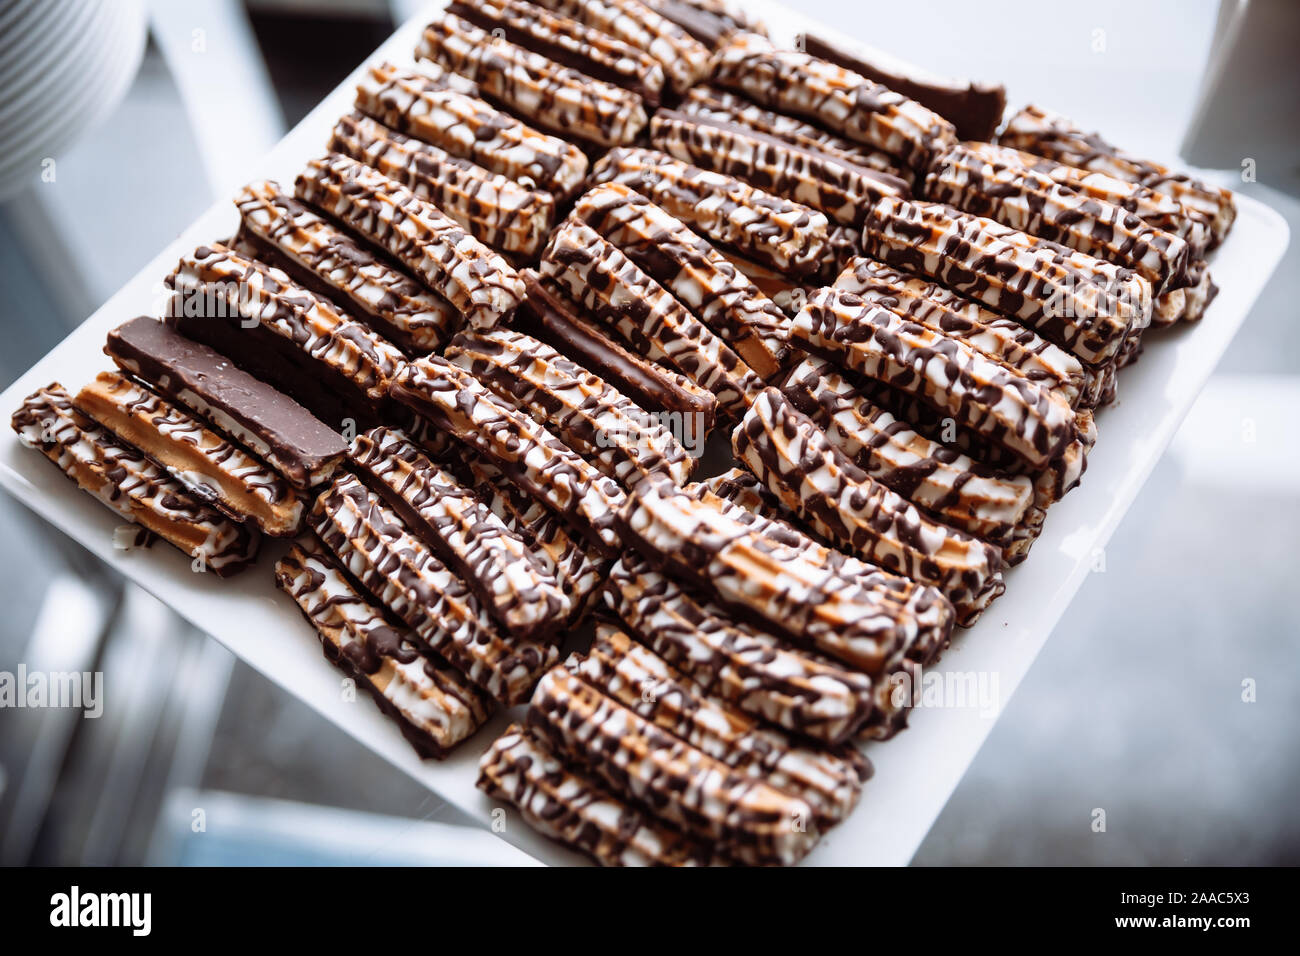 Shortbread cookies, drizzled with chocolate lying on a white, square plate. Stock Photo